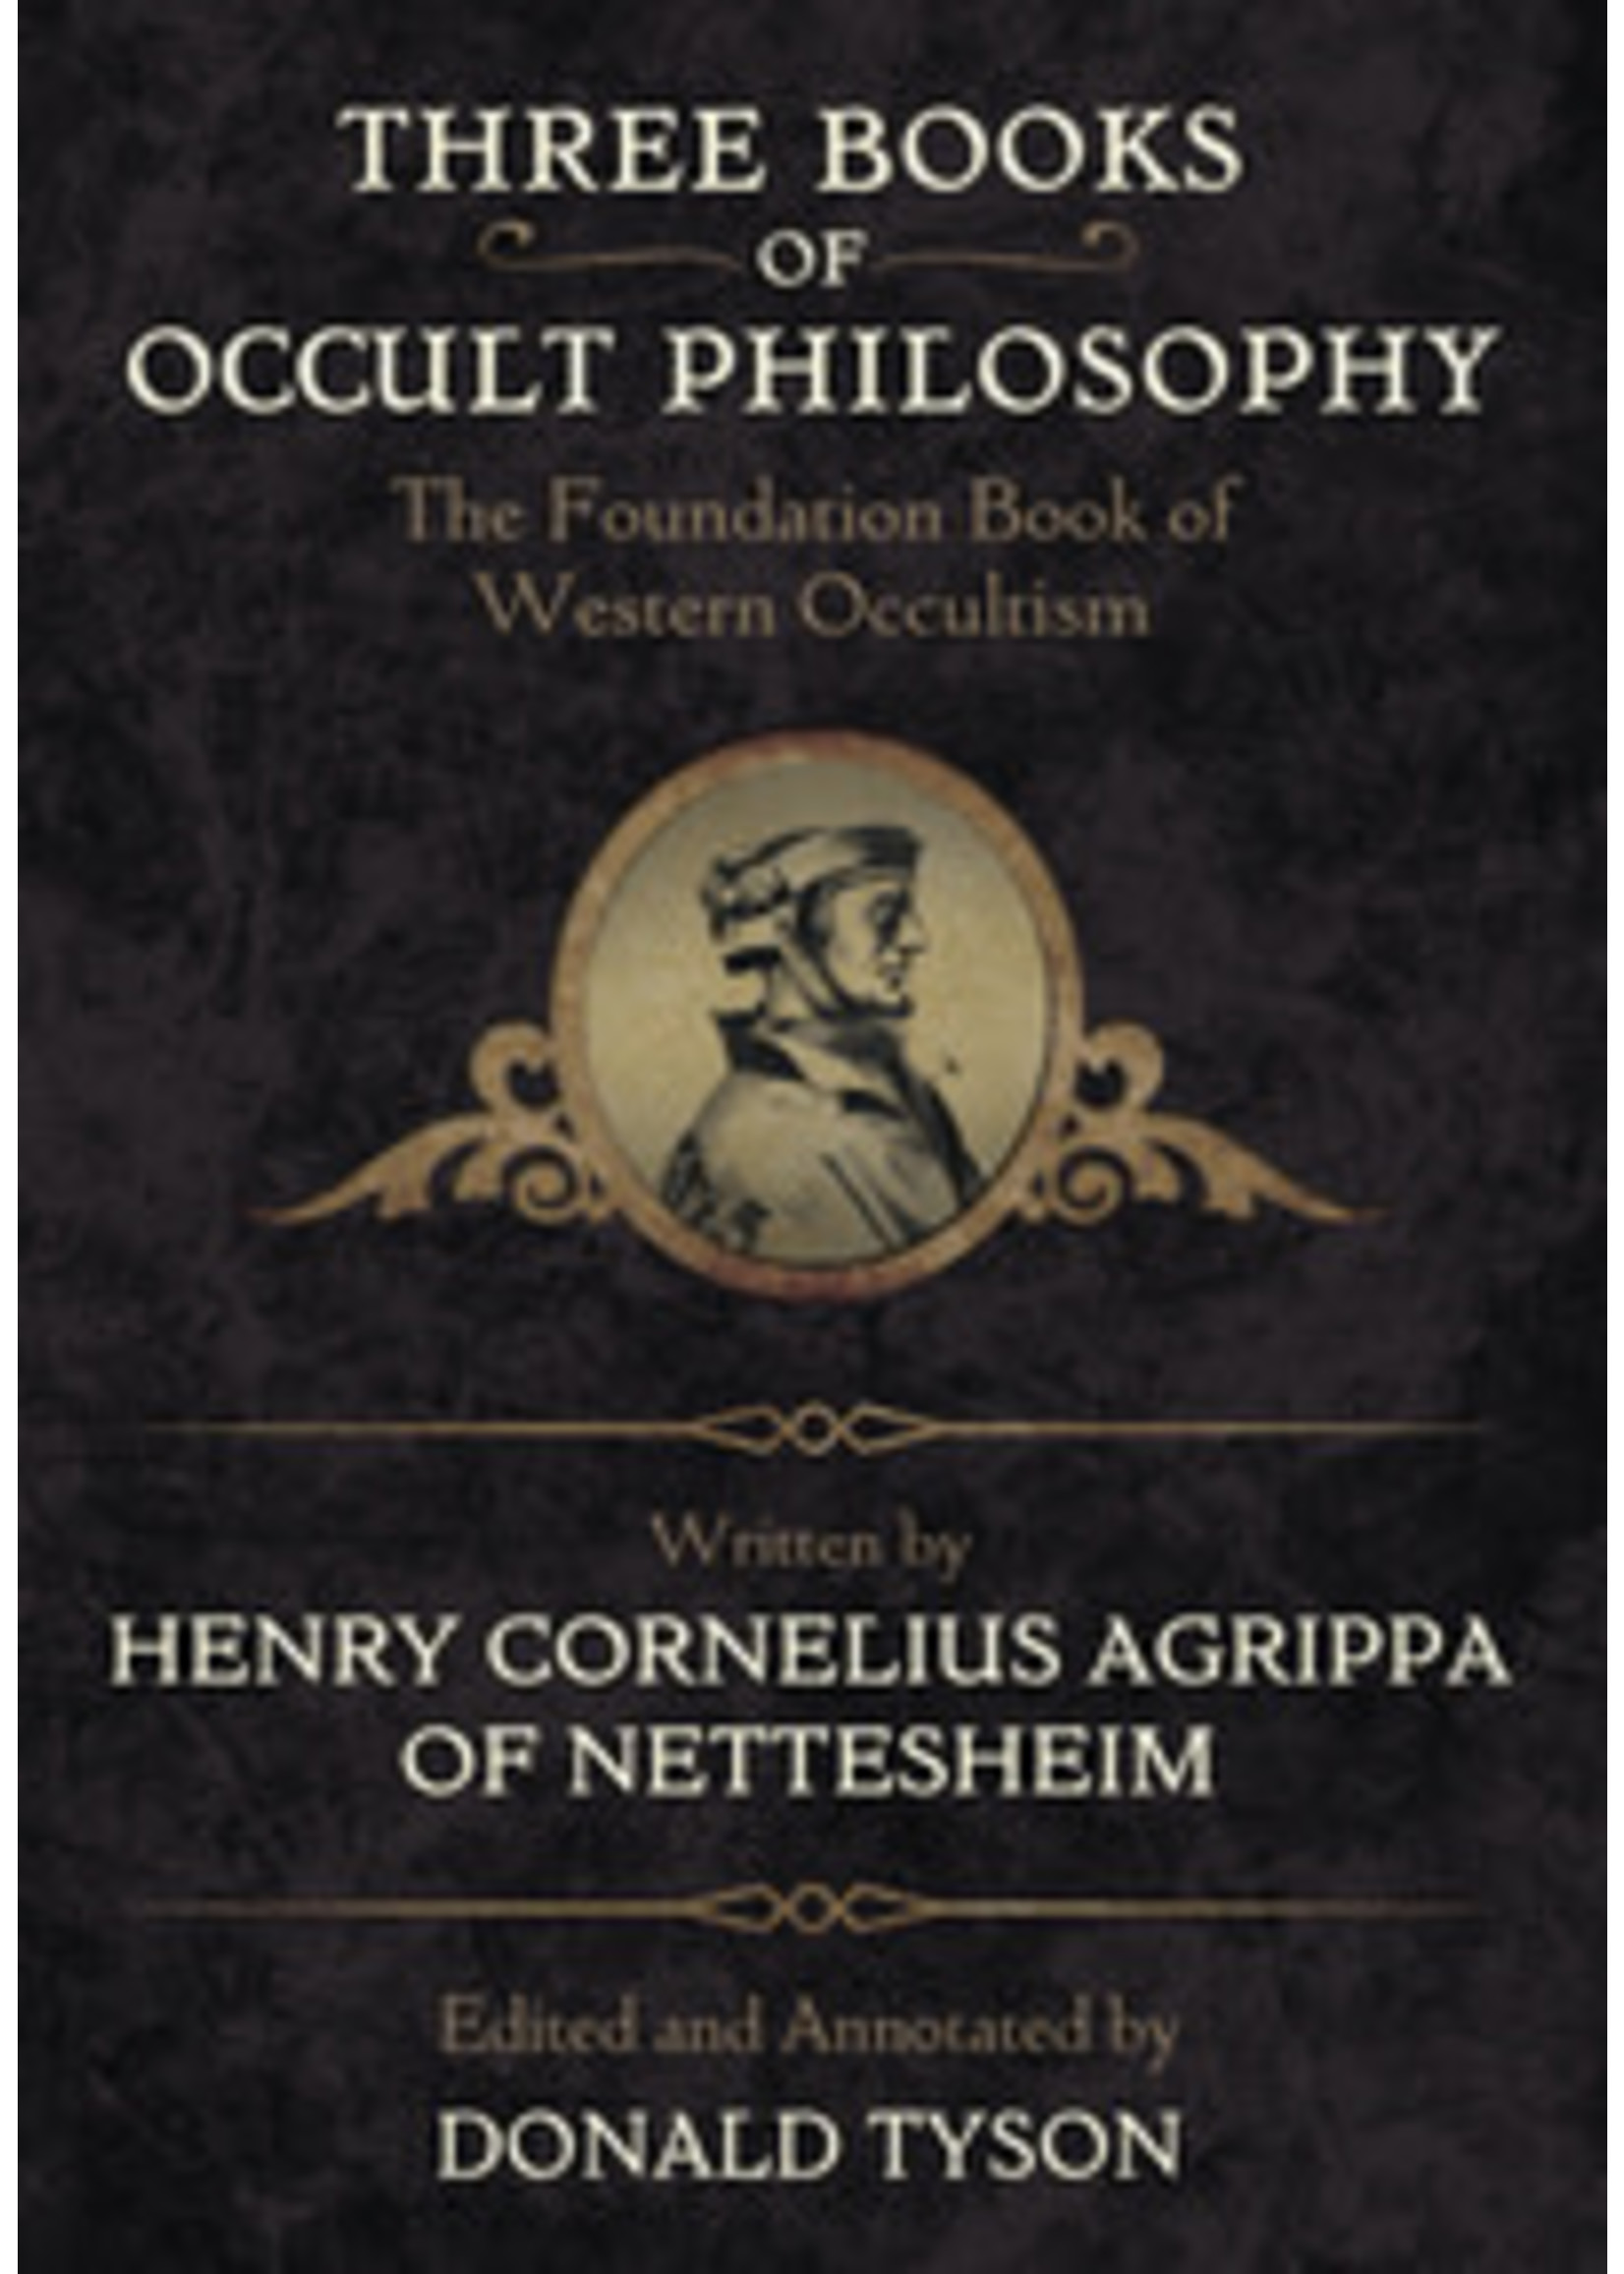 Three Books of Occult Philosophy by Henry Cornelius Agrippa, edited by Donald Tyson